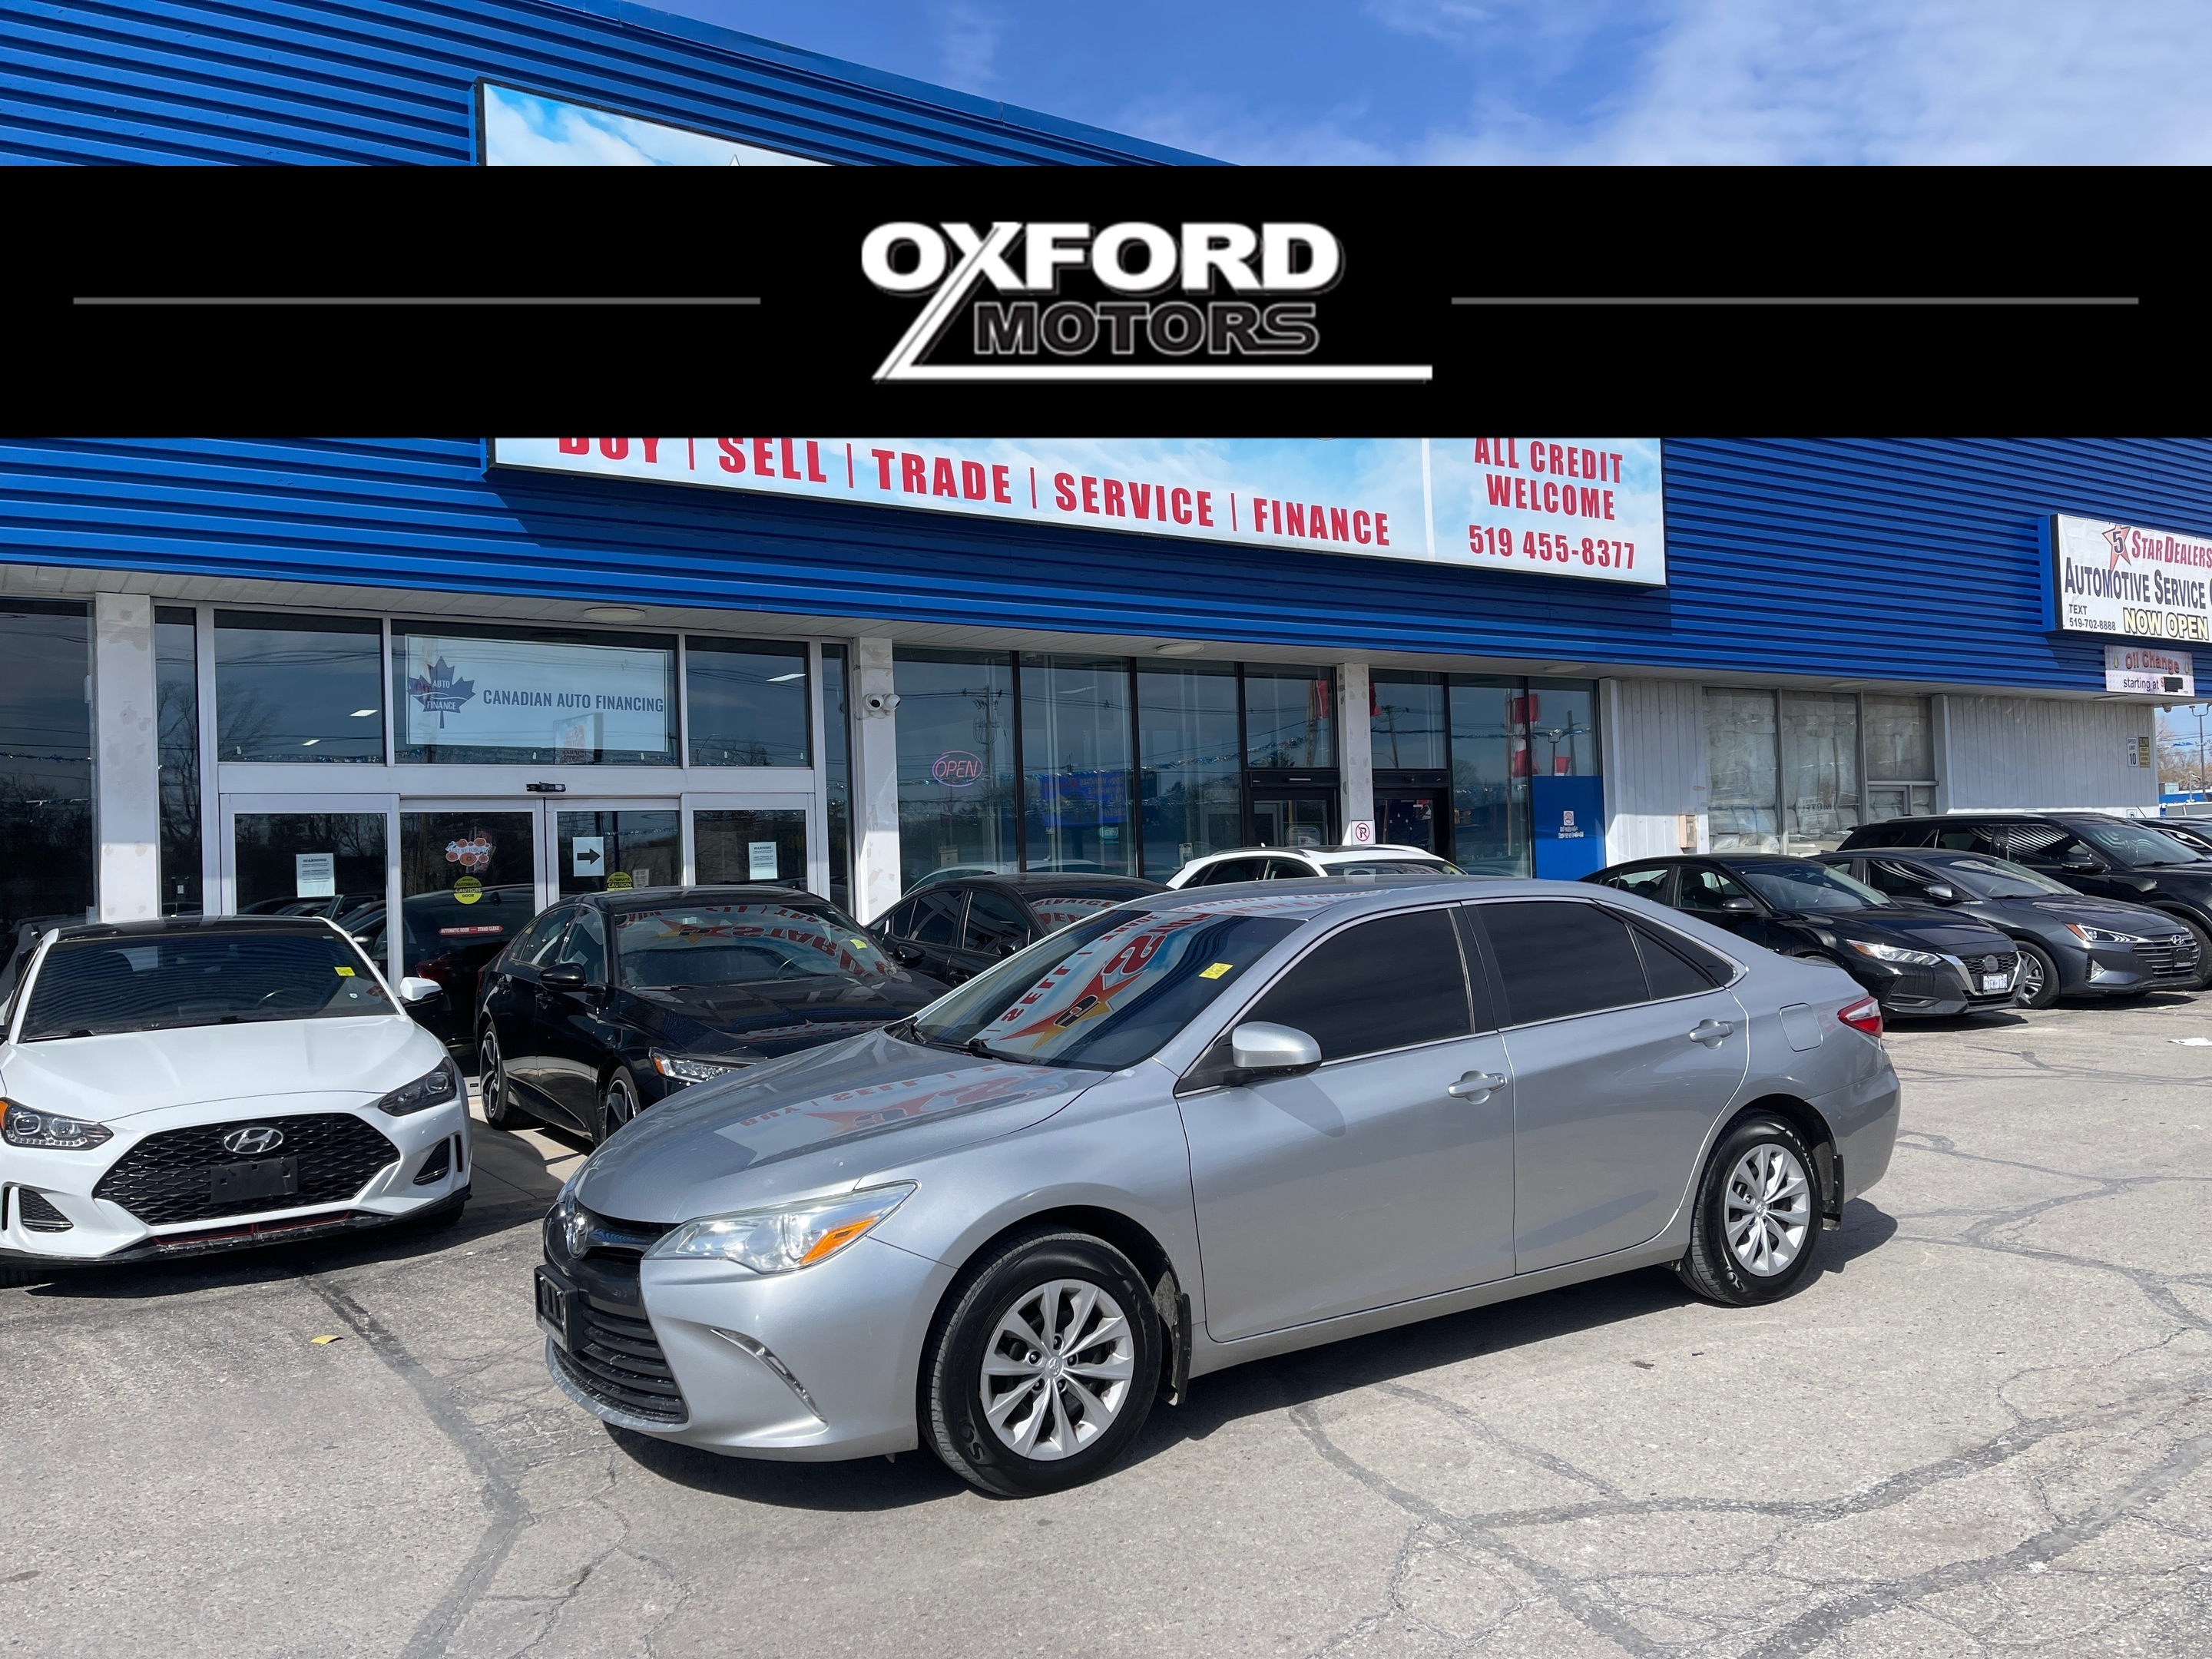 2015 Toyota Camry 4dr Sdn I4 Auto LE MINT! WE FINANCE ALL CREDIT!